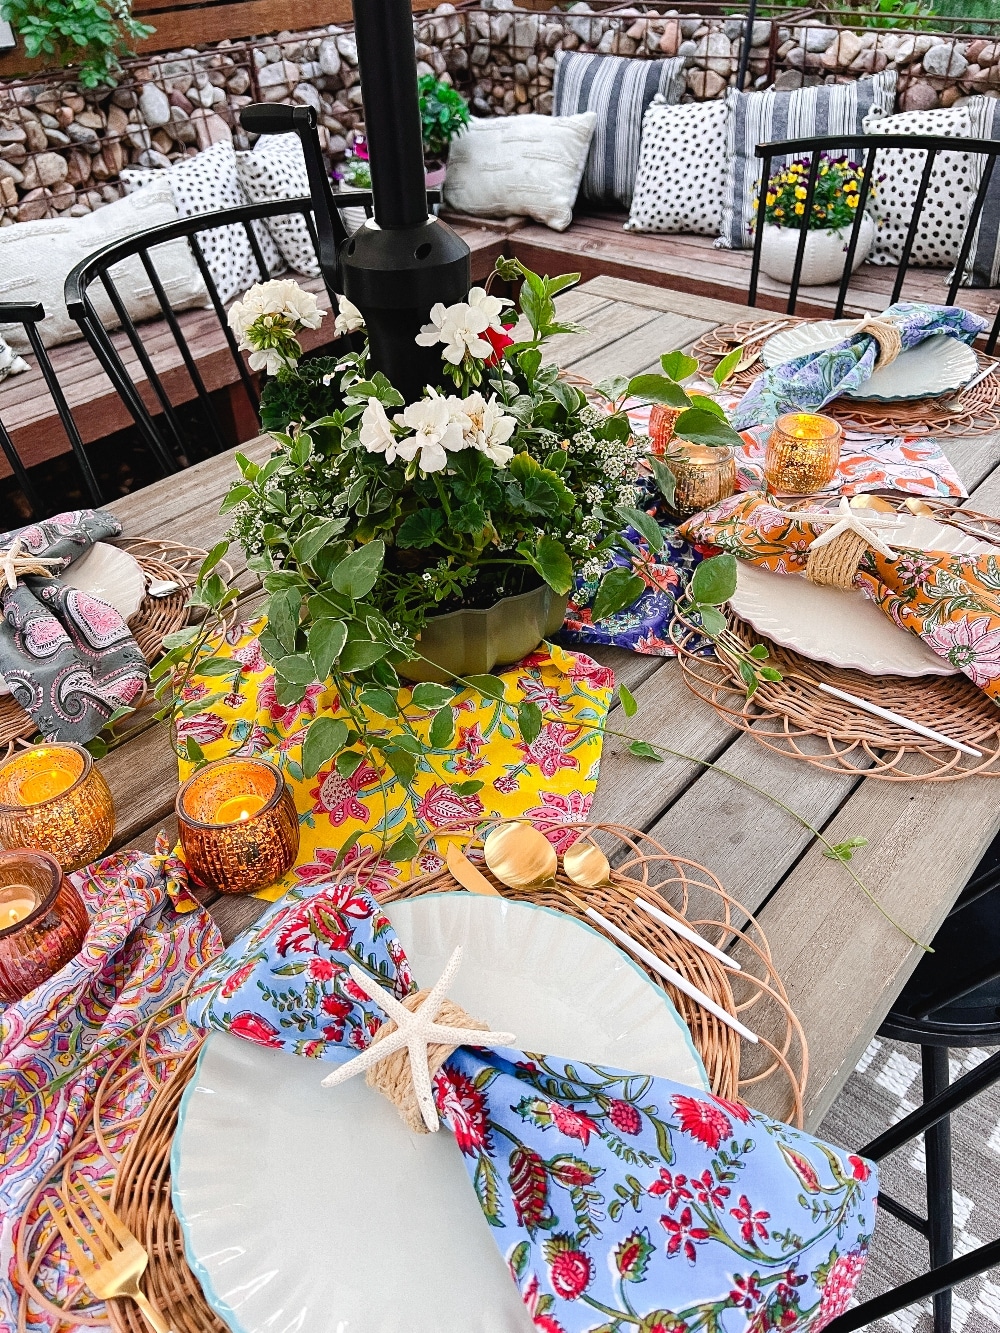 Colorful Nautical Spring Table. Create a vibrant coastal oasis with a Colorful Spring Nautical Table, featuring DIY napkin rings, woven placemats, candlelit ambiance, and lush green garland accents, perfect for unforgettable gatherings.